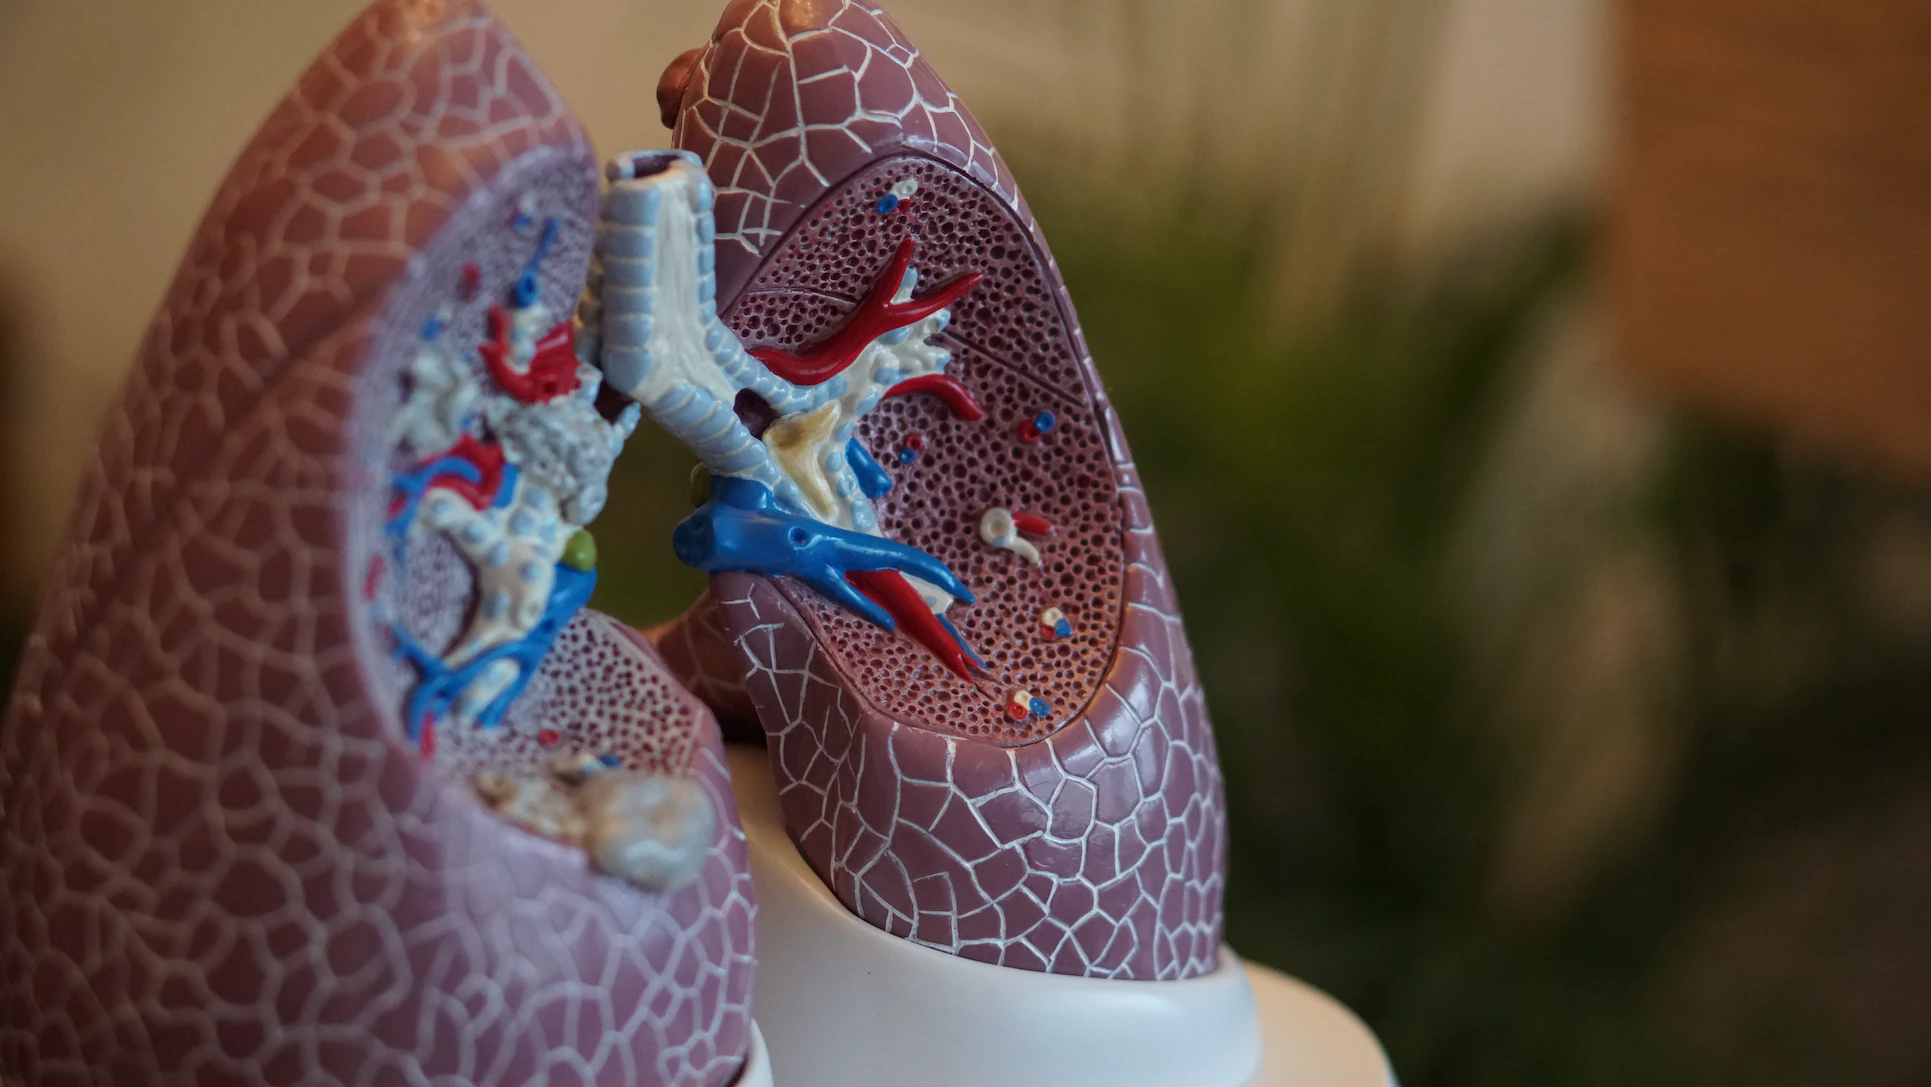 COPD Breathing Aid Developed